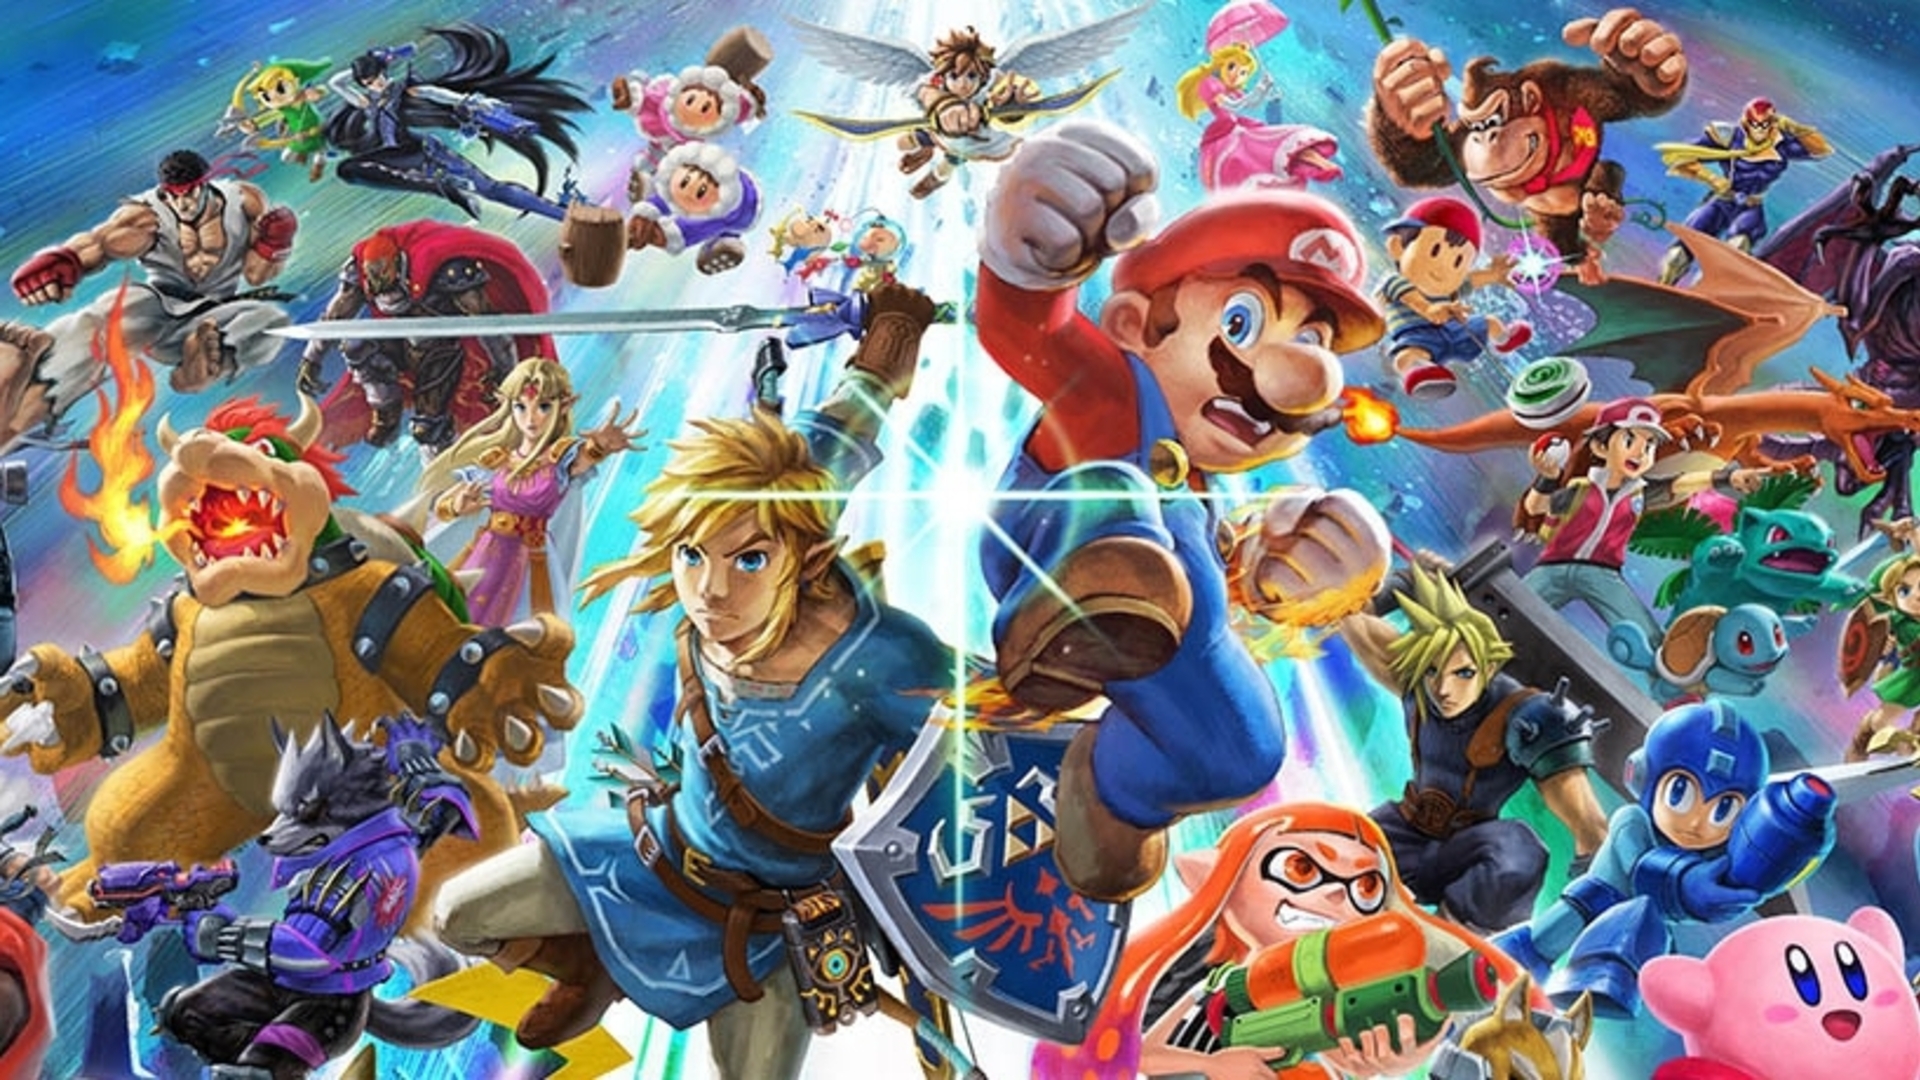 Promo art of Super Smash Bros Ultimate, showing many of the characters